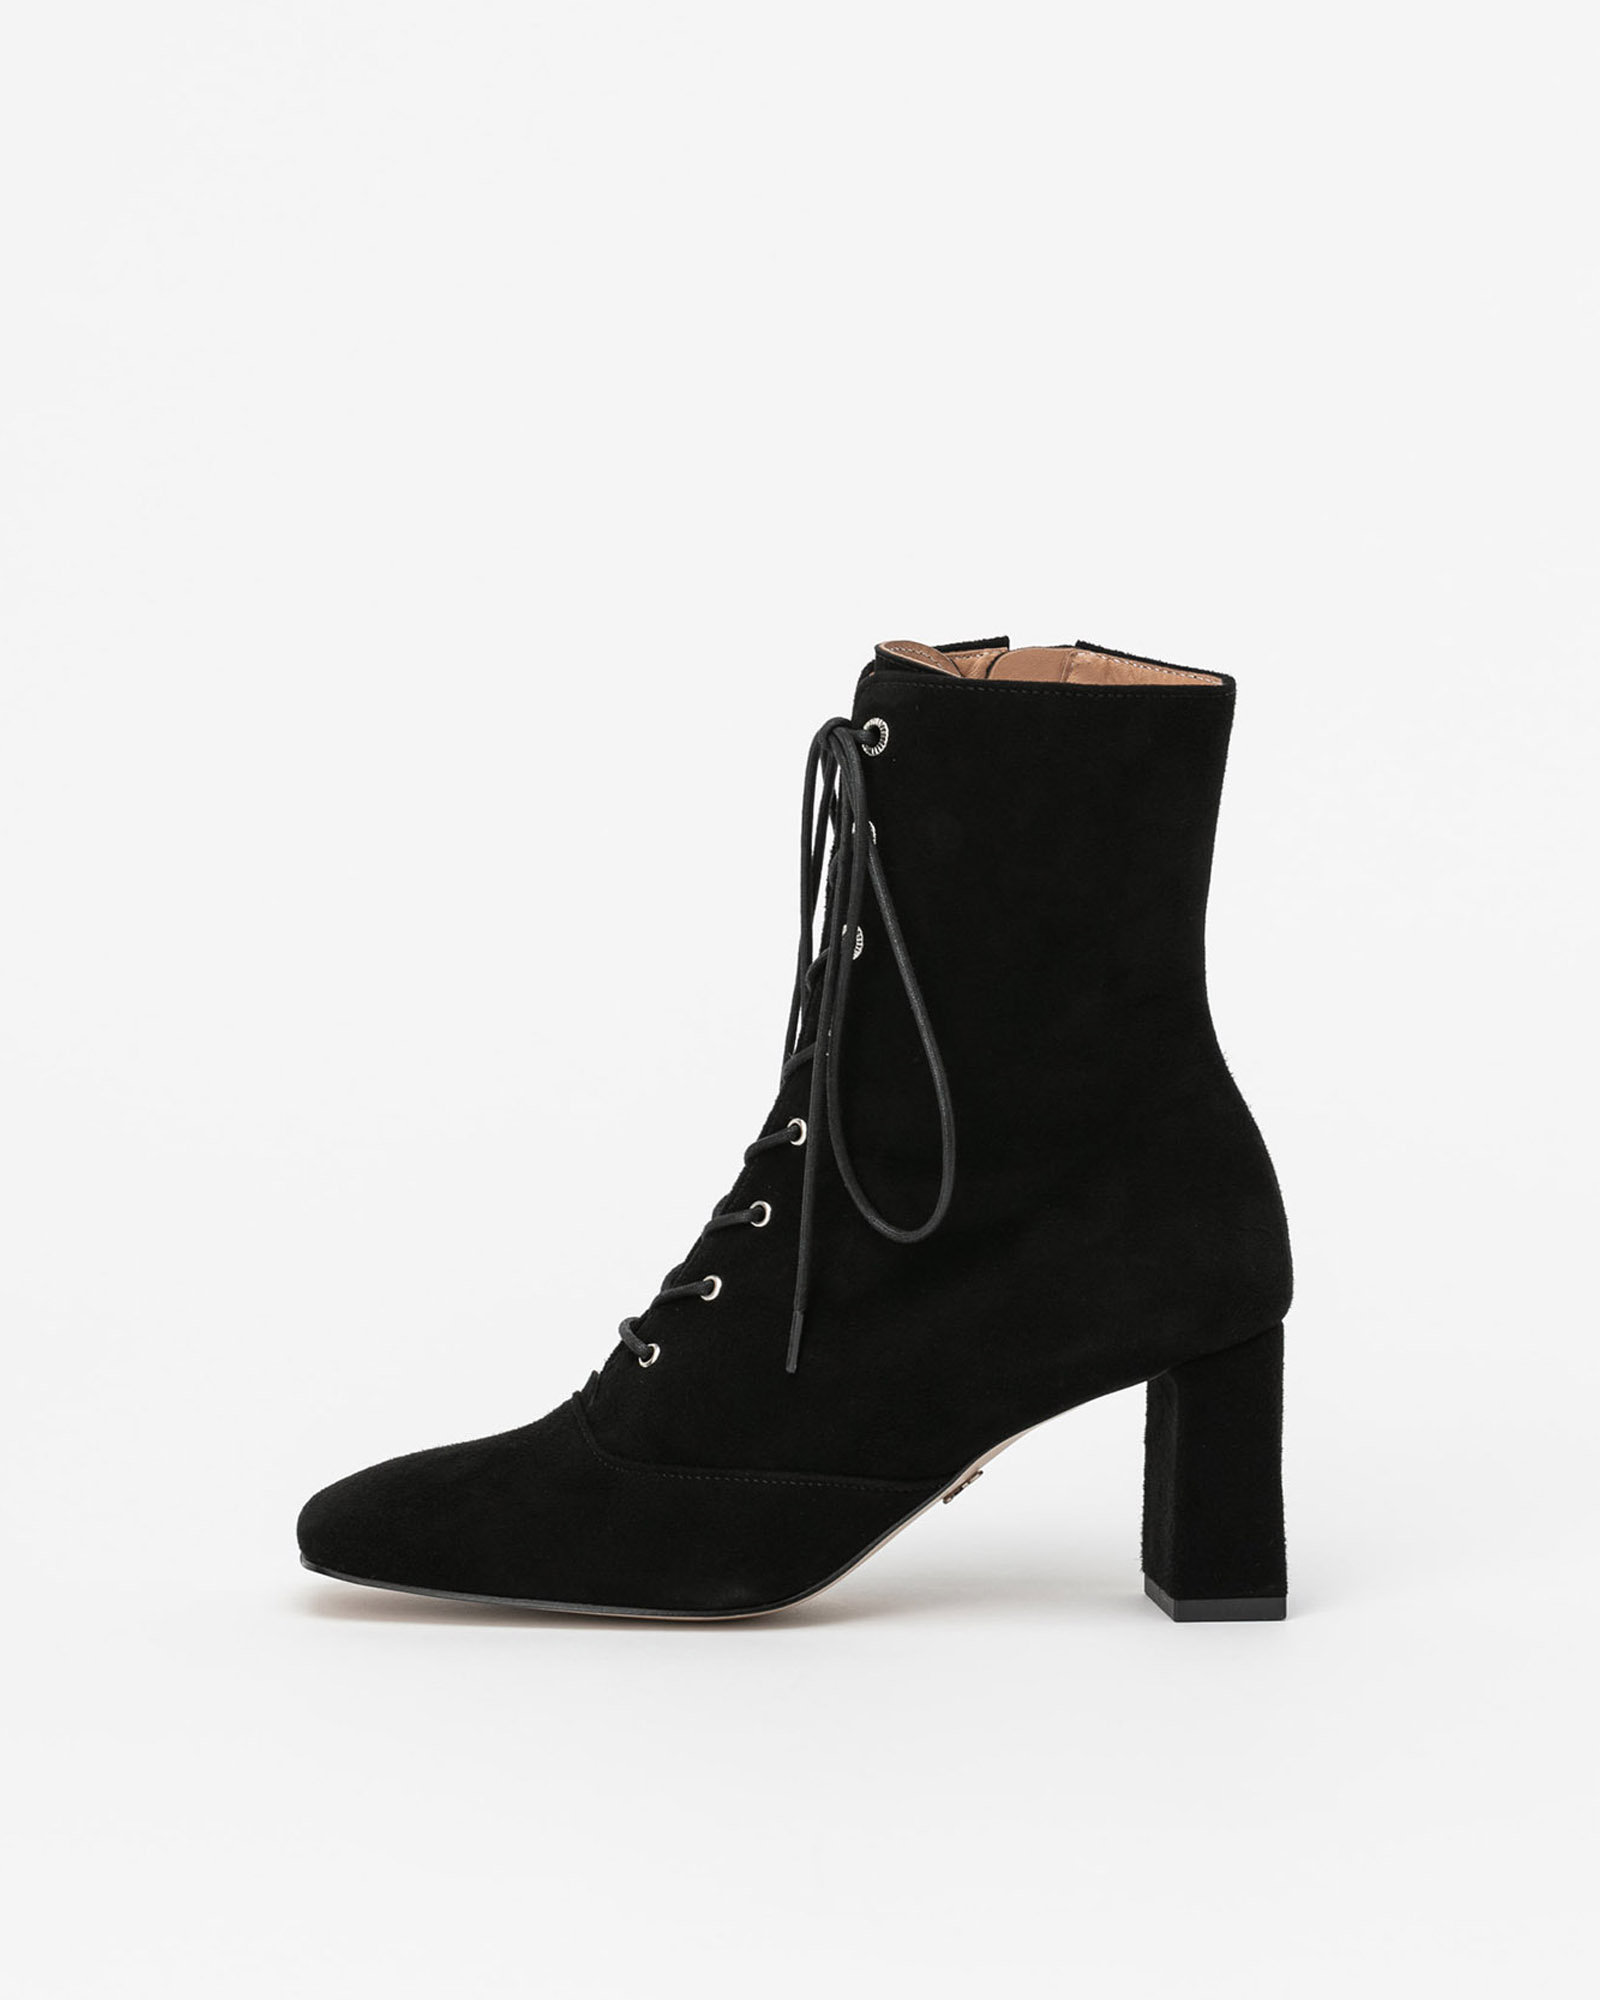 Avriel Lace-up Boots in Black Suede